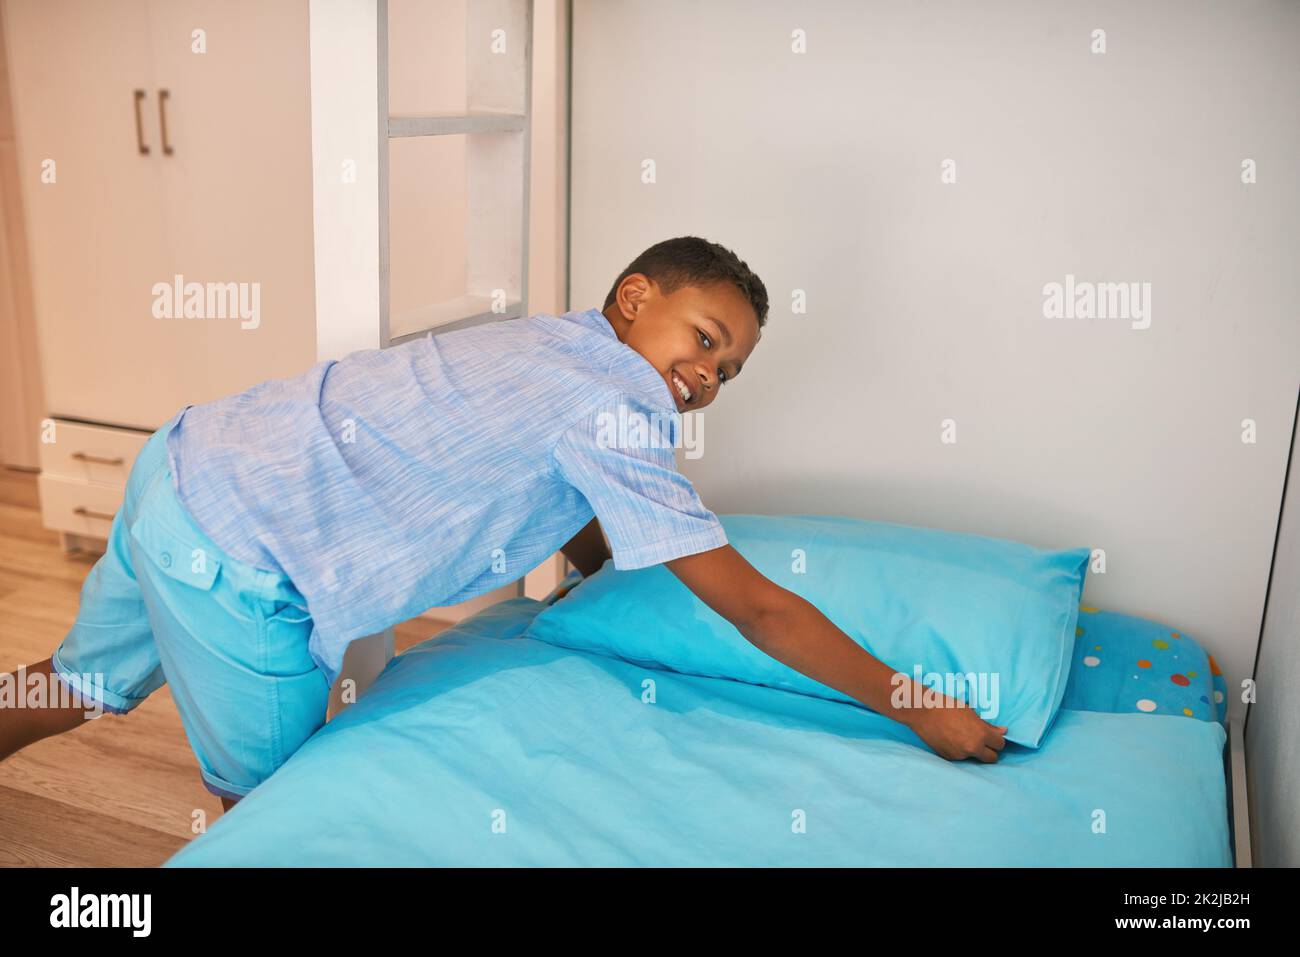 Neatening the bed. Portrait of a young boy making up a bed. Stock Photo